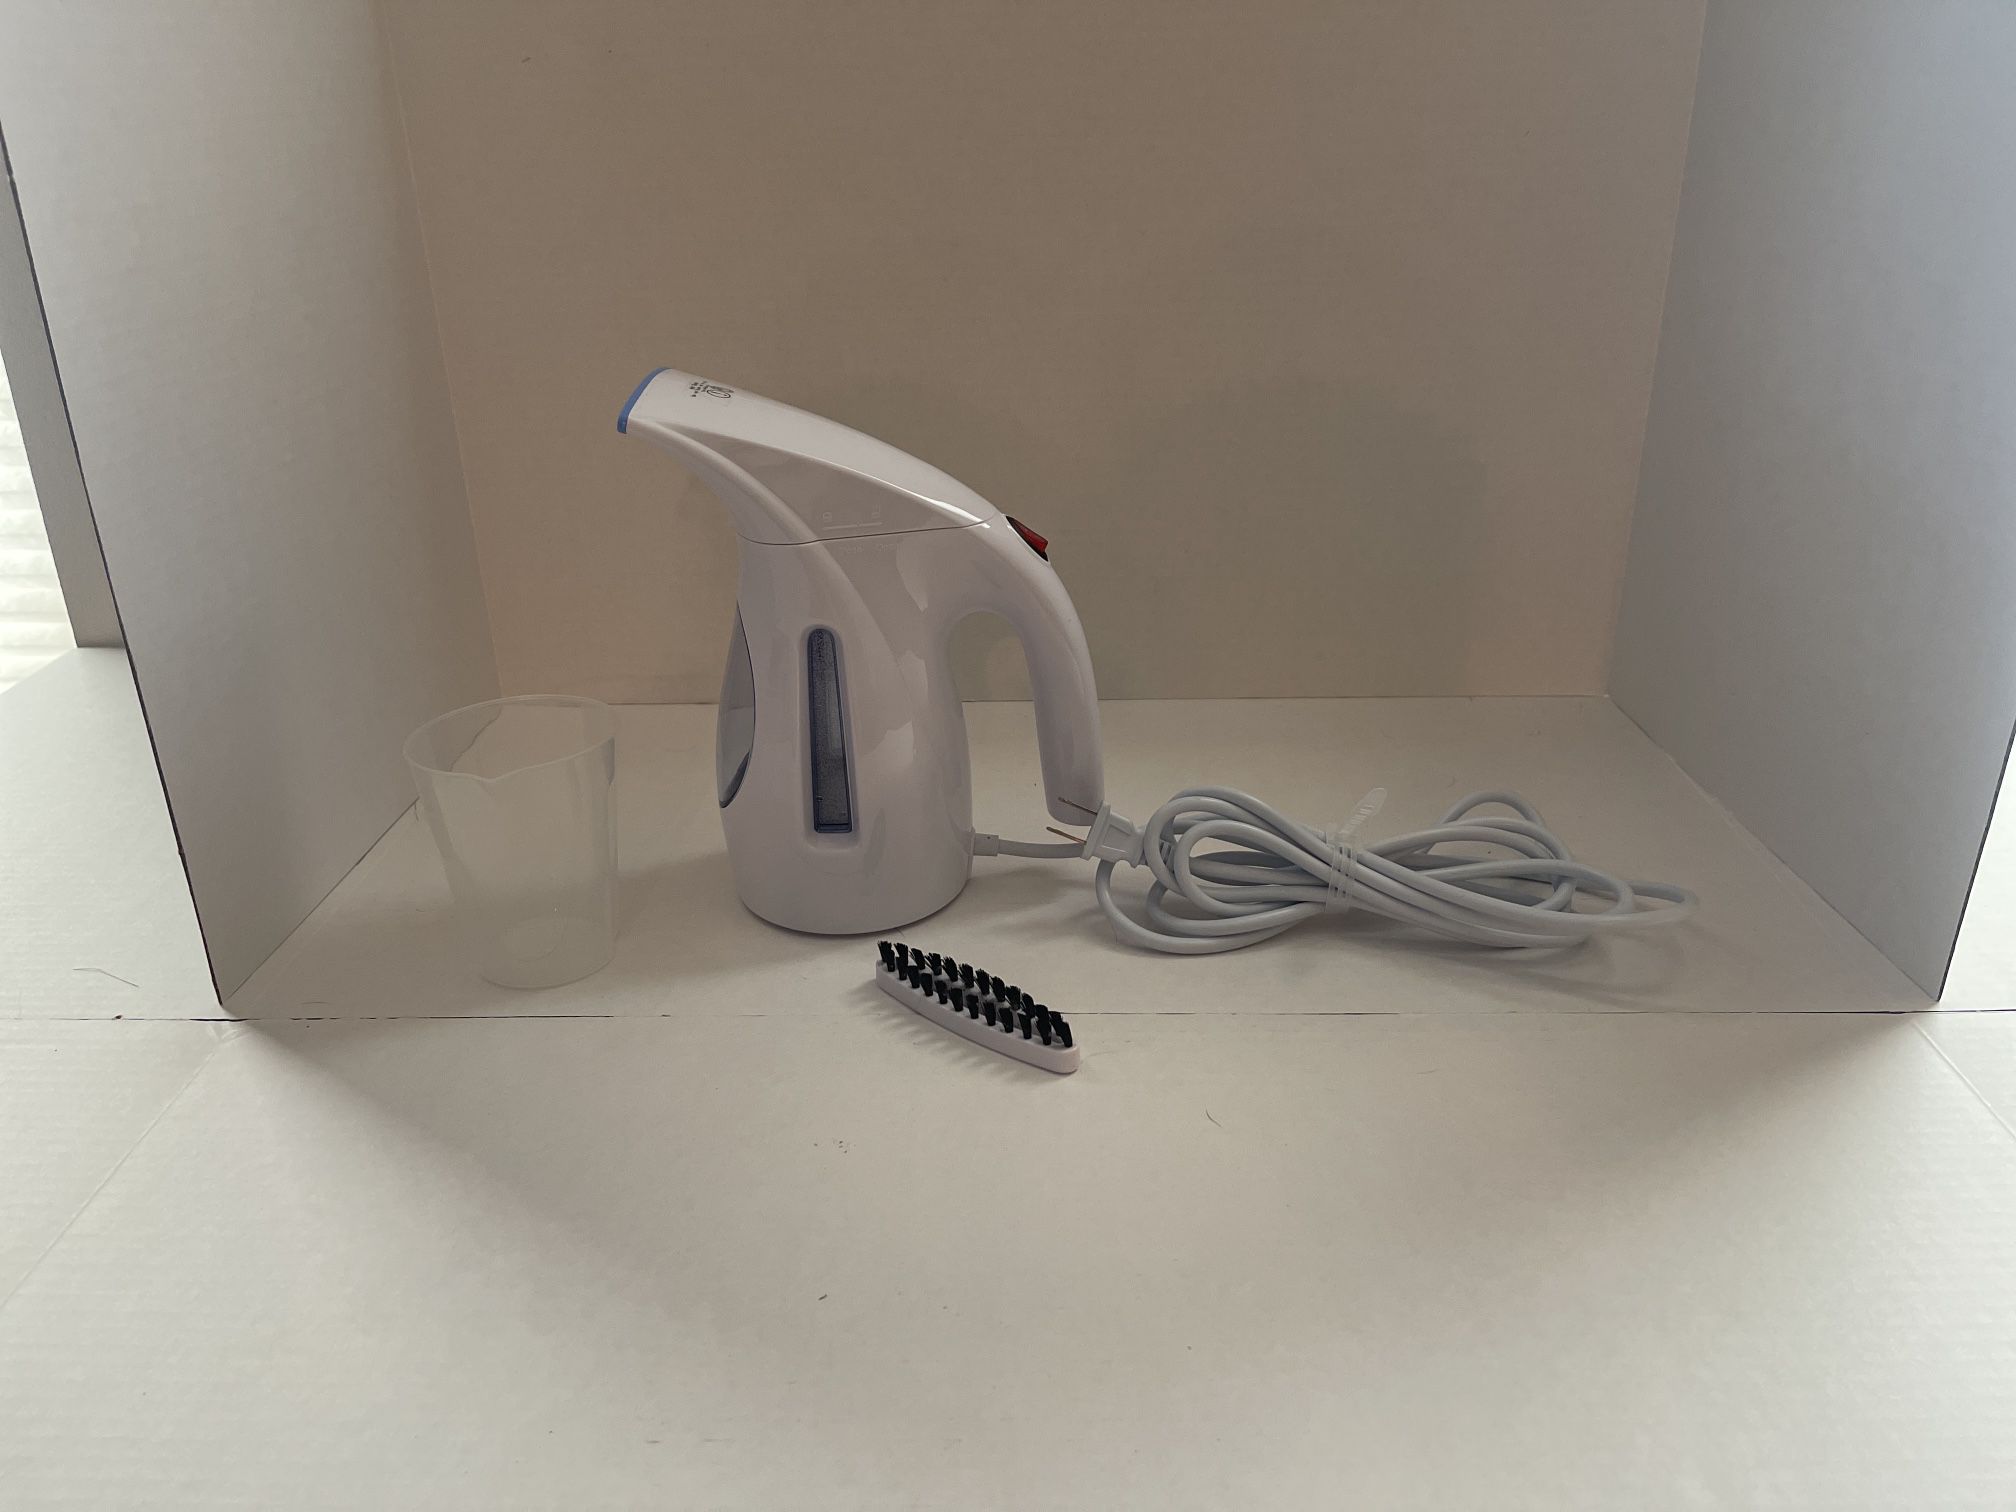 Hilife Steamer for Clothes Steamer, Handheld Garment Steamer Clothing Iron 240ml